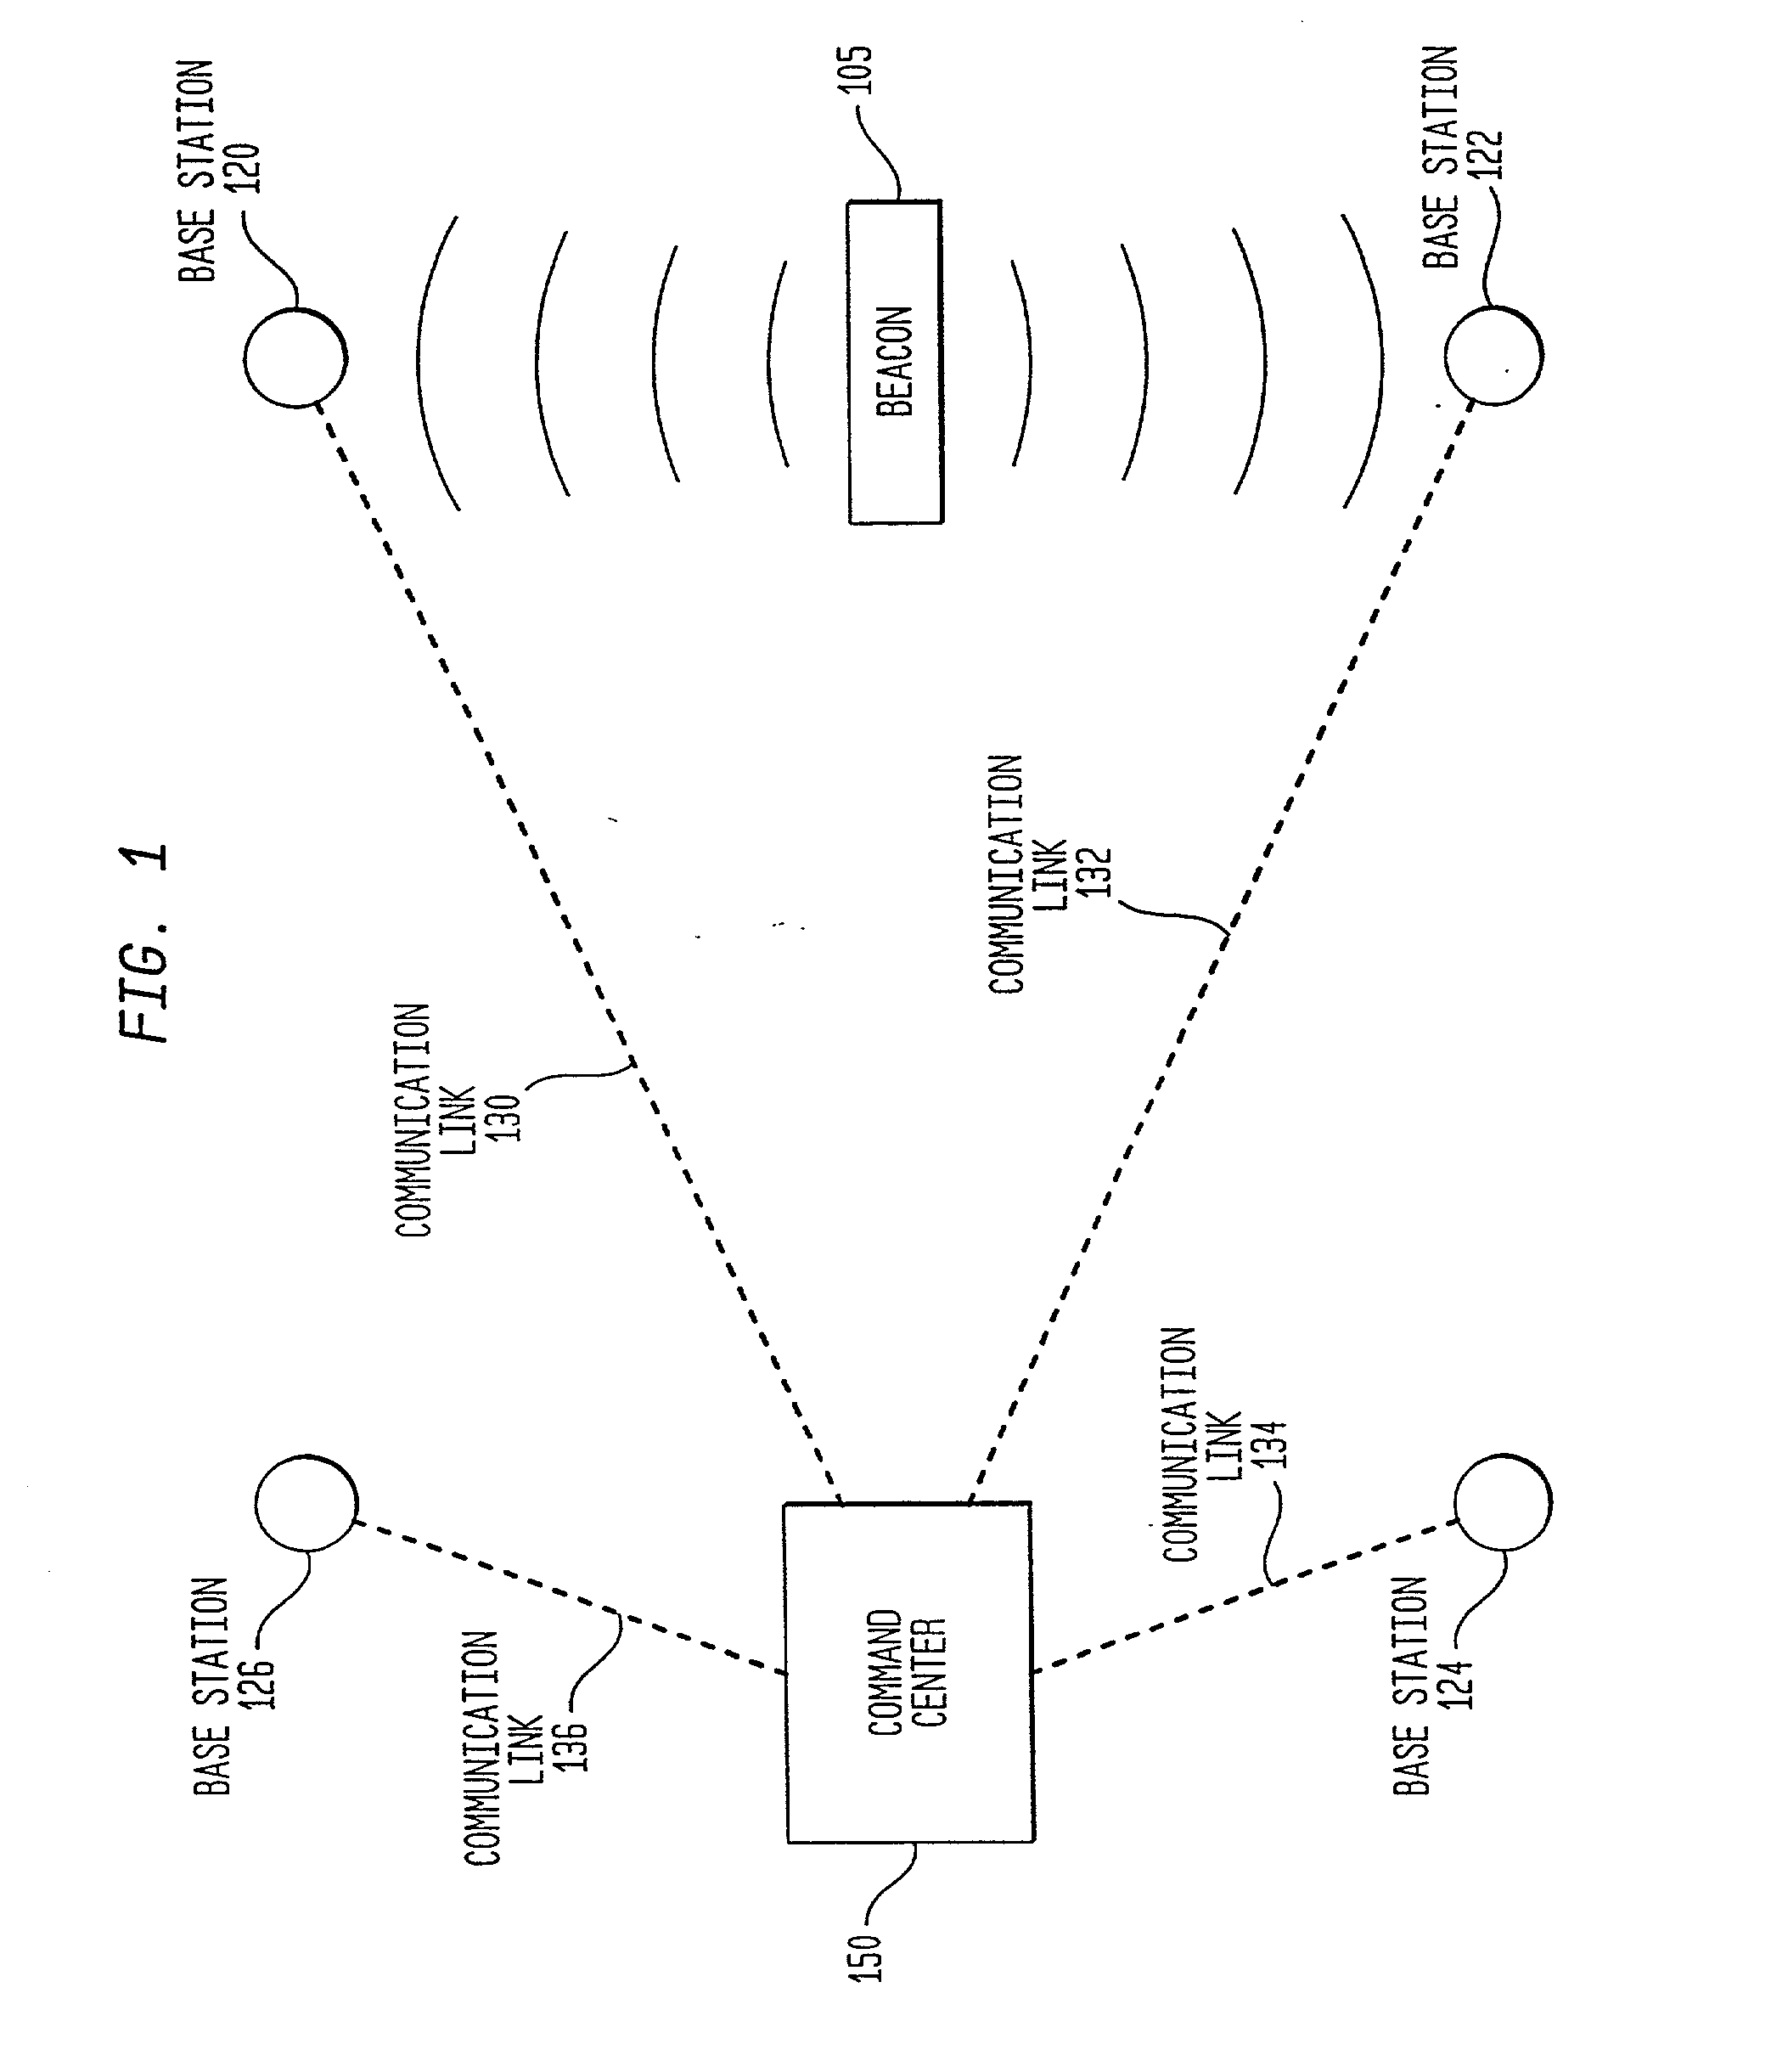 Method and system for providing location dependent and personal identification information to a public safety answering point